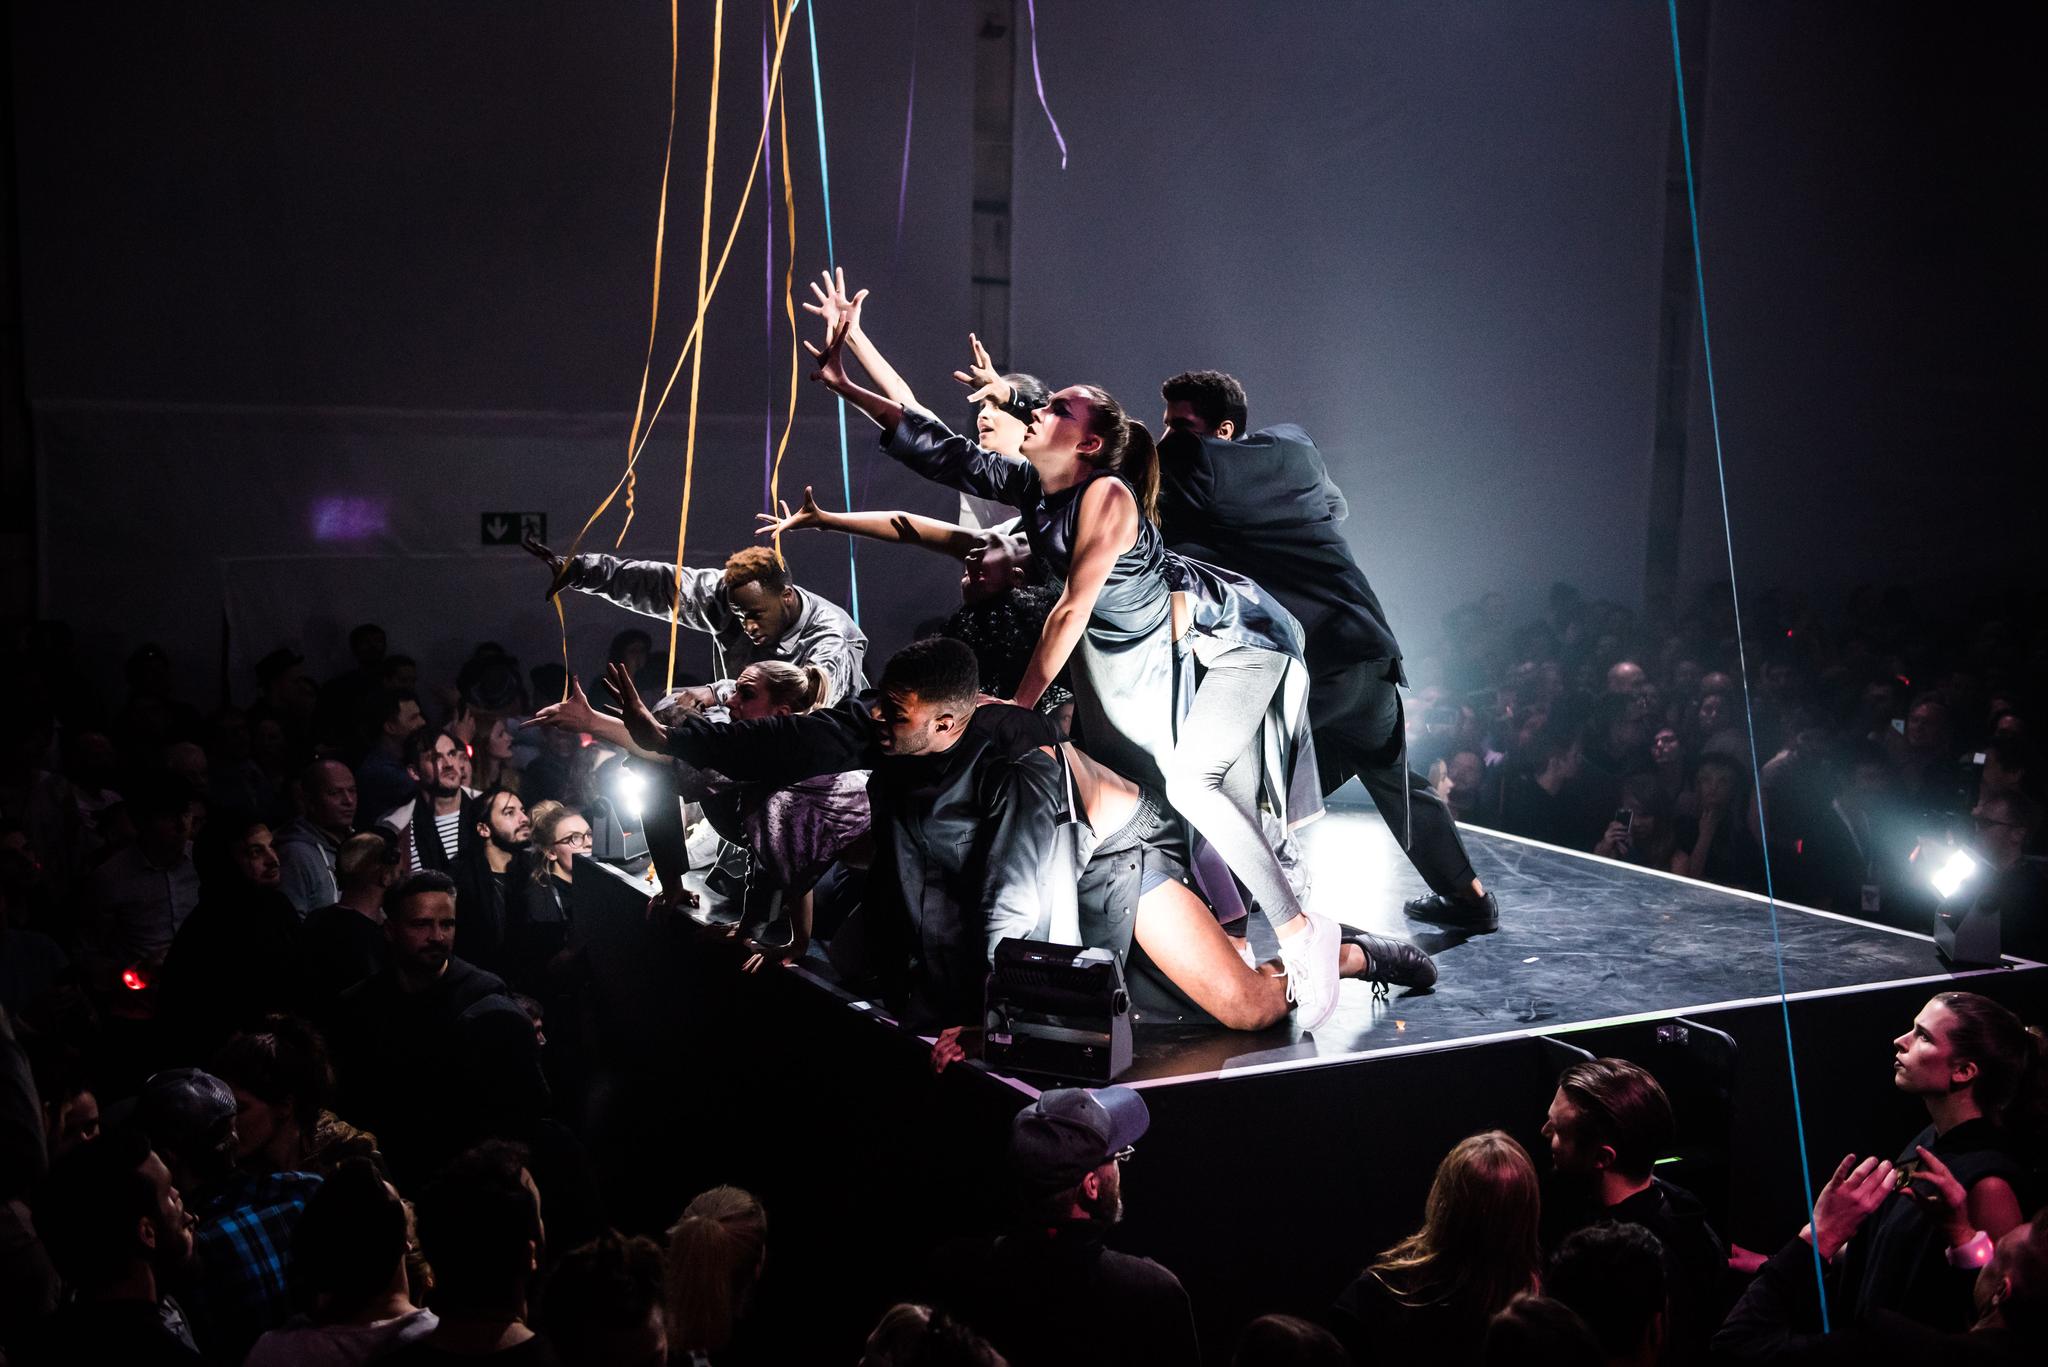 A group of dancers reach forward, out into the air, performing on a pedestal in a club setting.